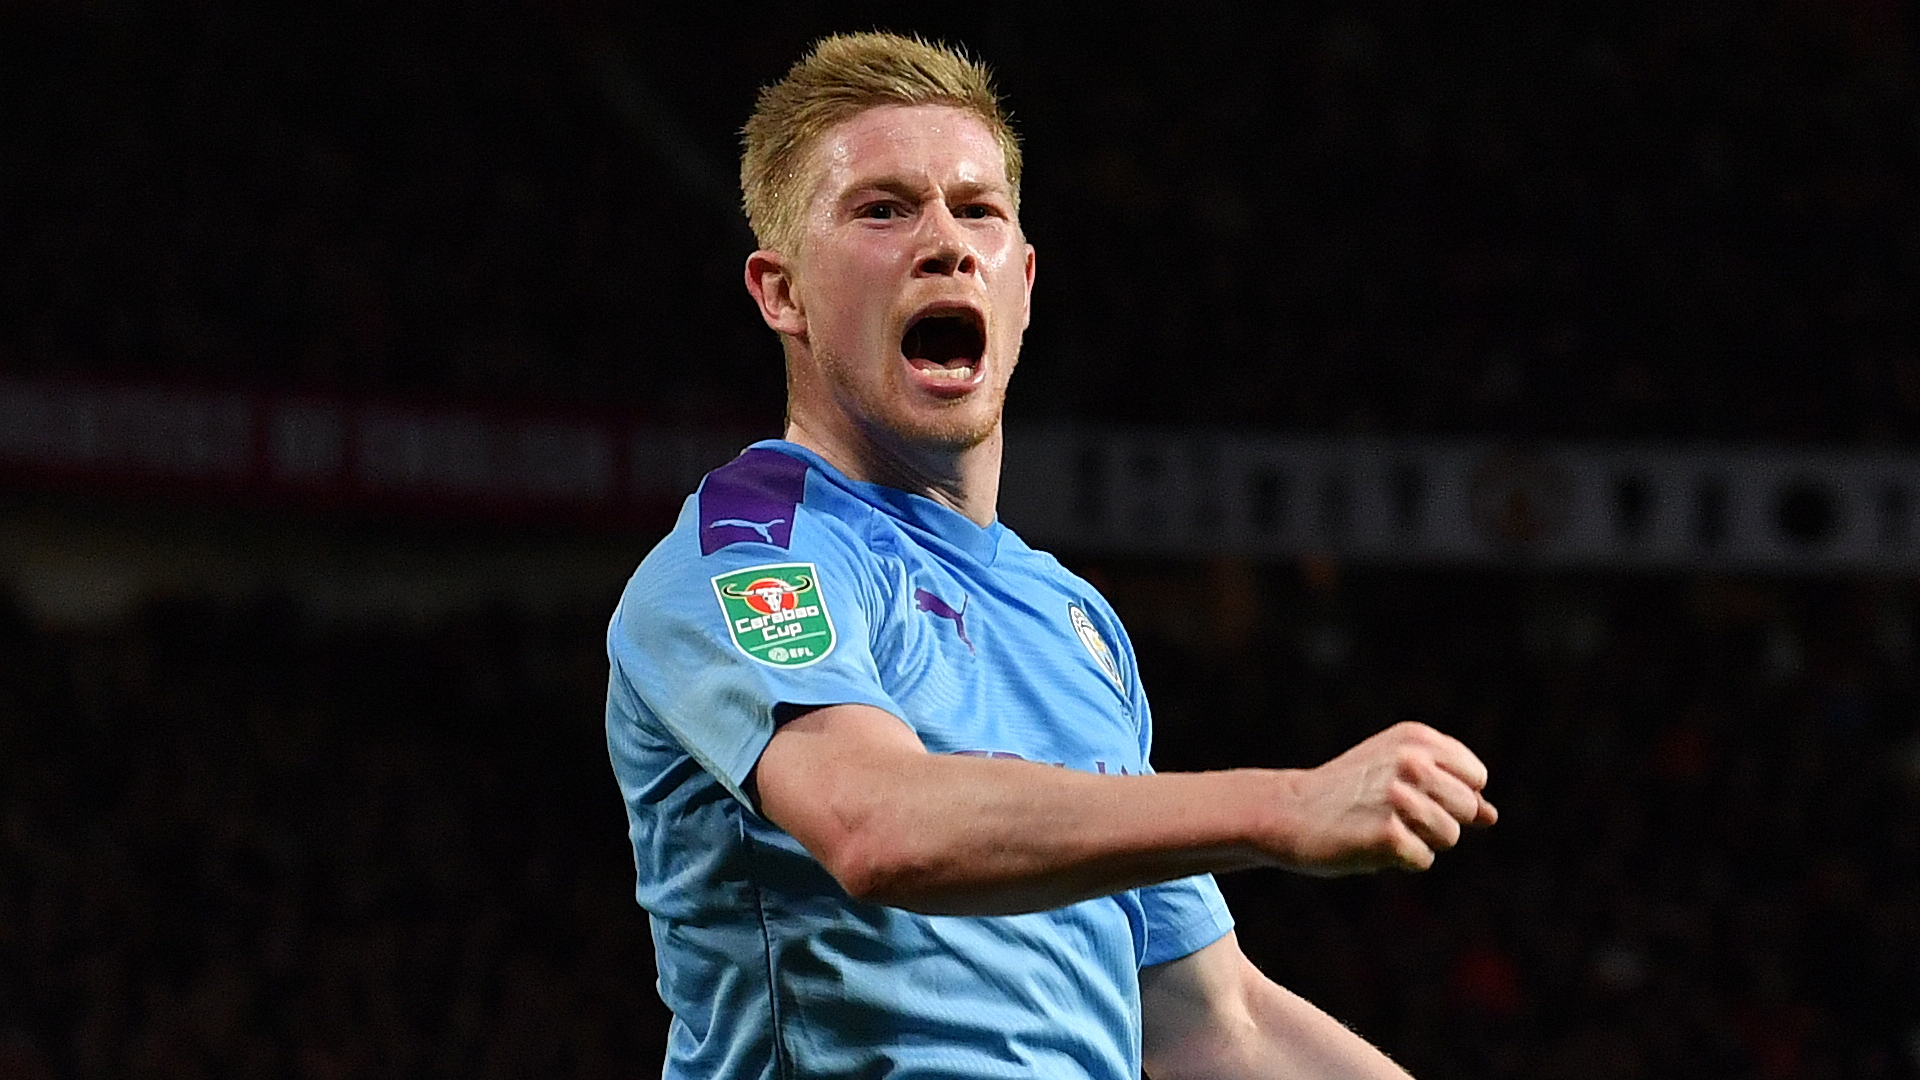 ‘Liverpool the best team, but De Bruyne the best player’ – Belgium boss Martinez tips Man City star for PFA prize